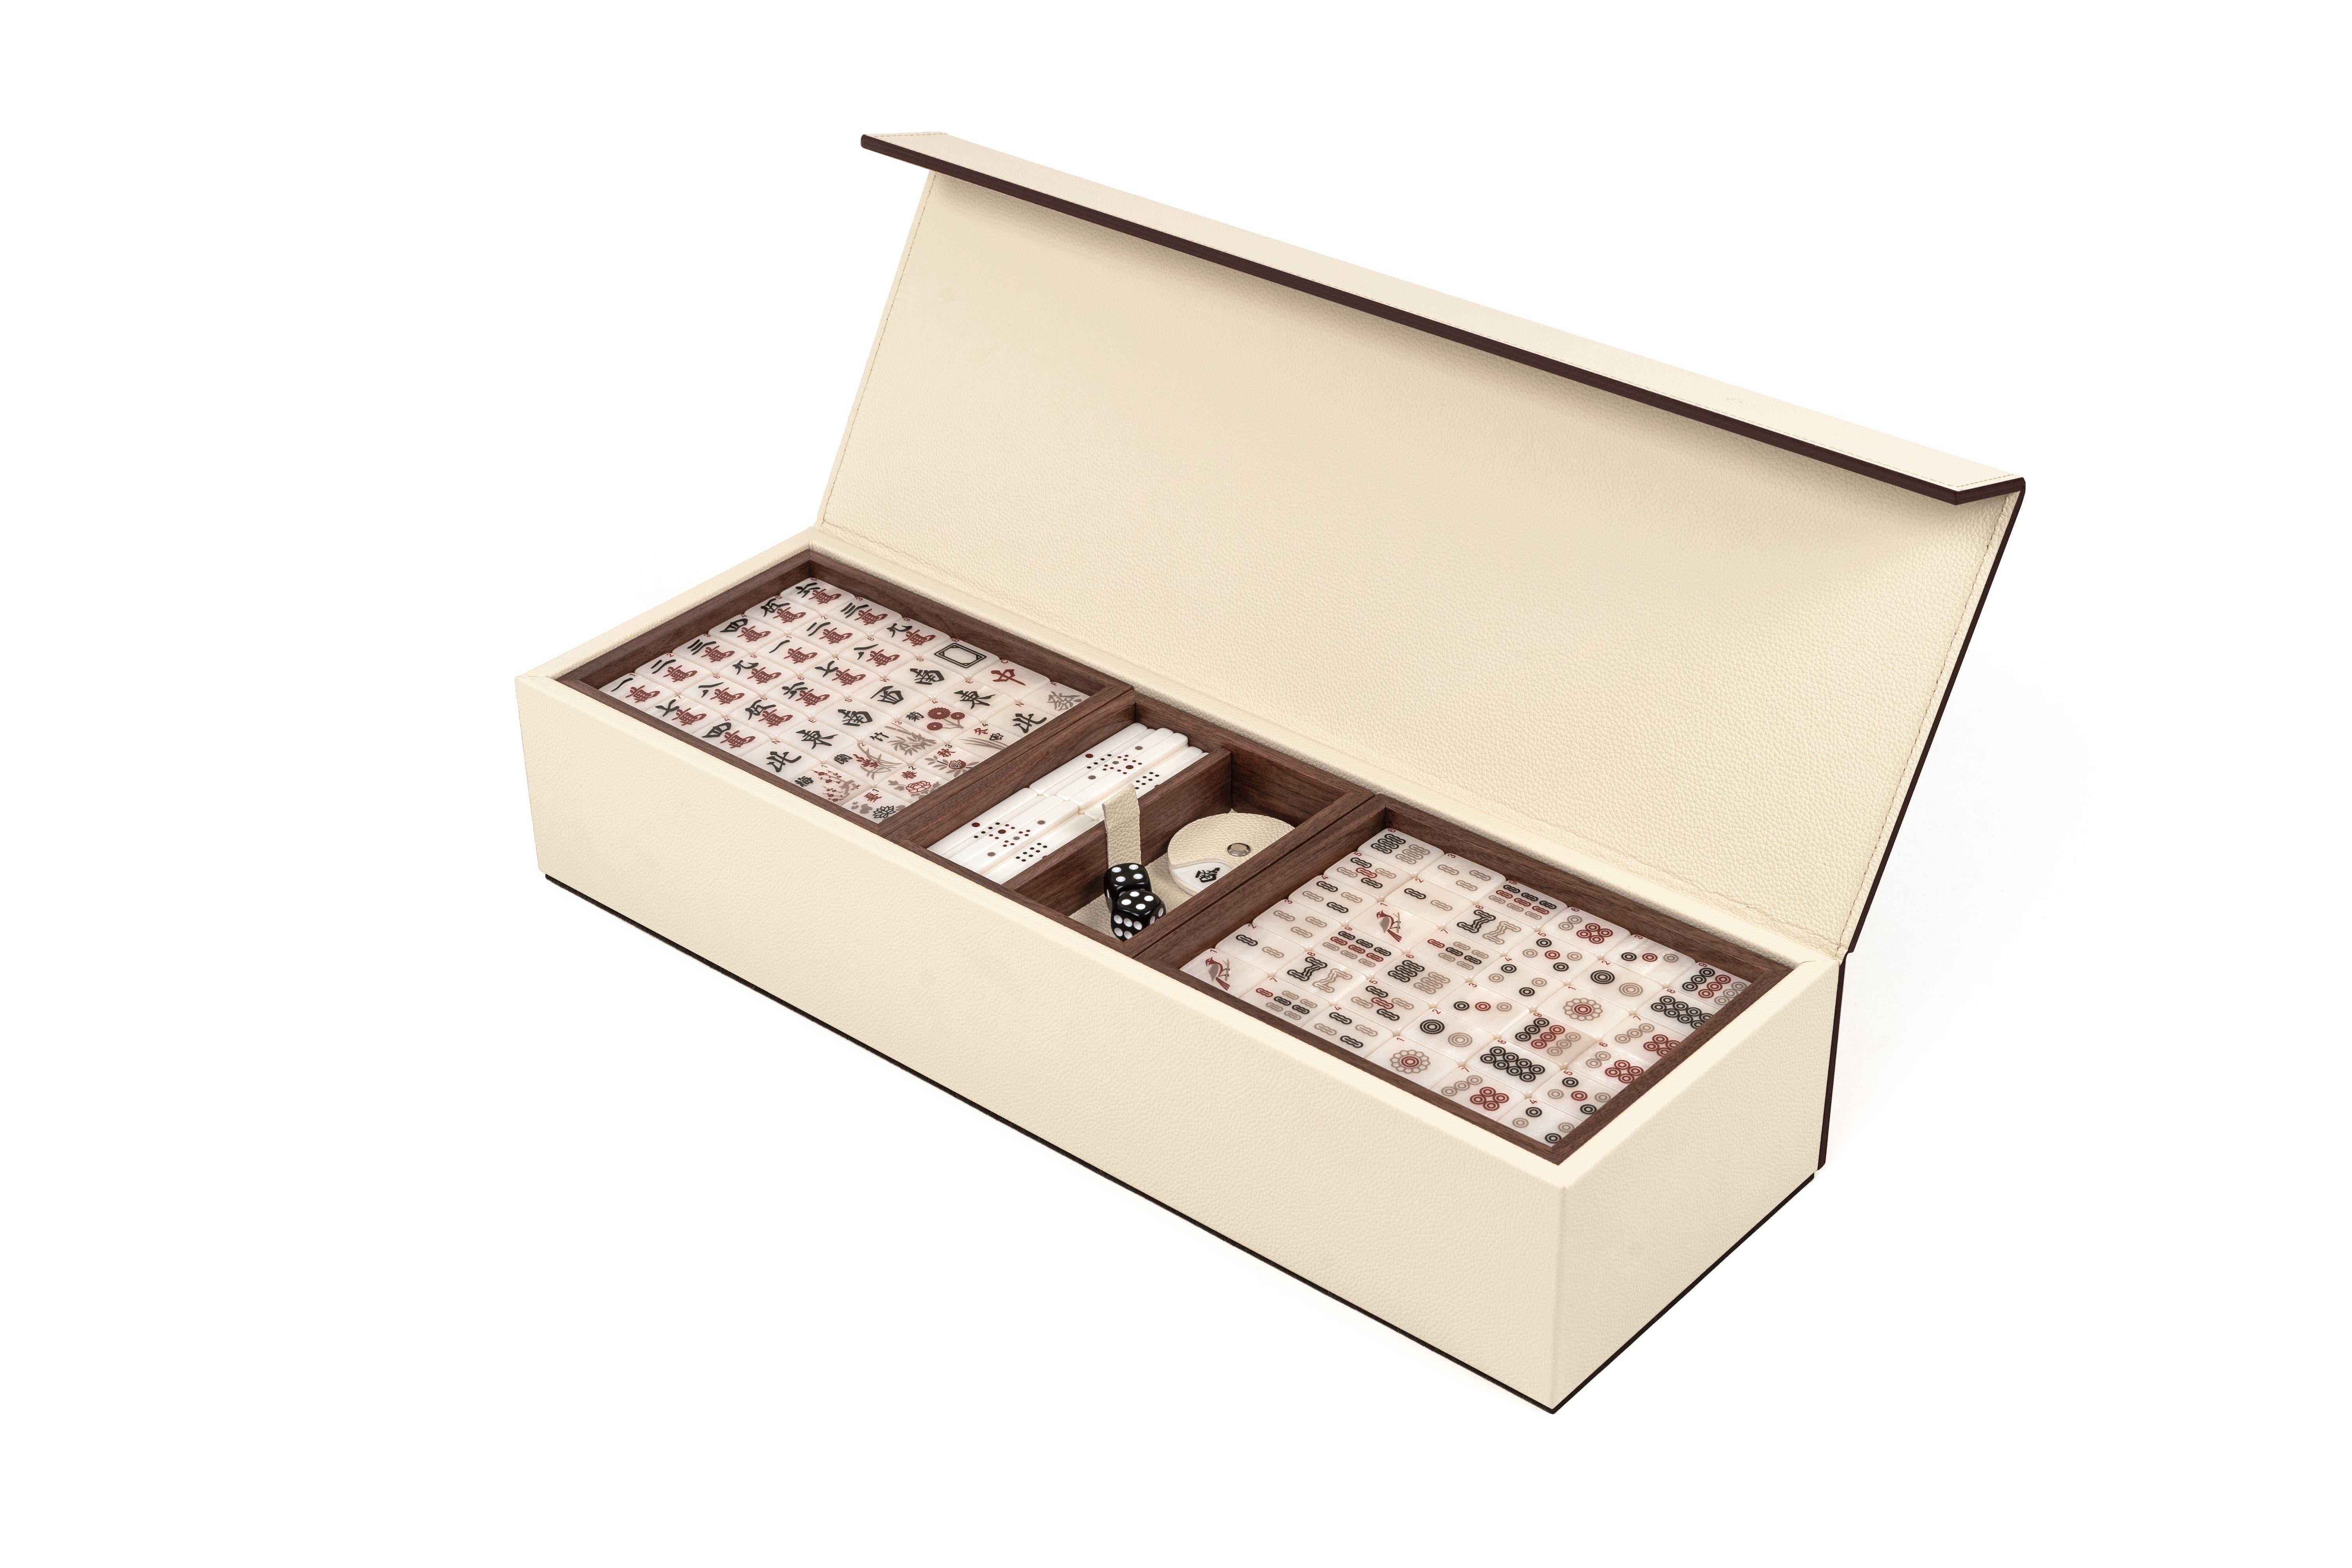 Our brand new Mahjong, a complete restyling for one of the most popular and played games worldwide. 

Entirely covered in genuine calf leather, our Mahjong comes in a luxurious wooden box with a magnetic closure lid. The set is composed by 144